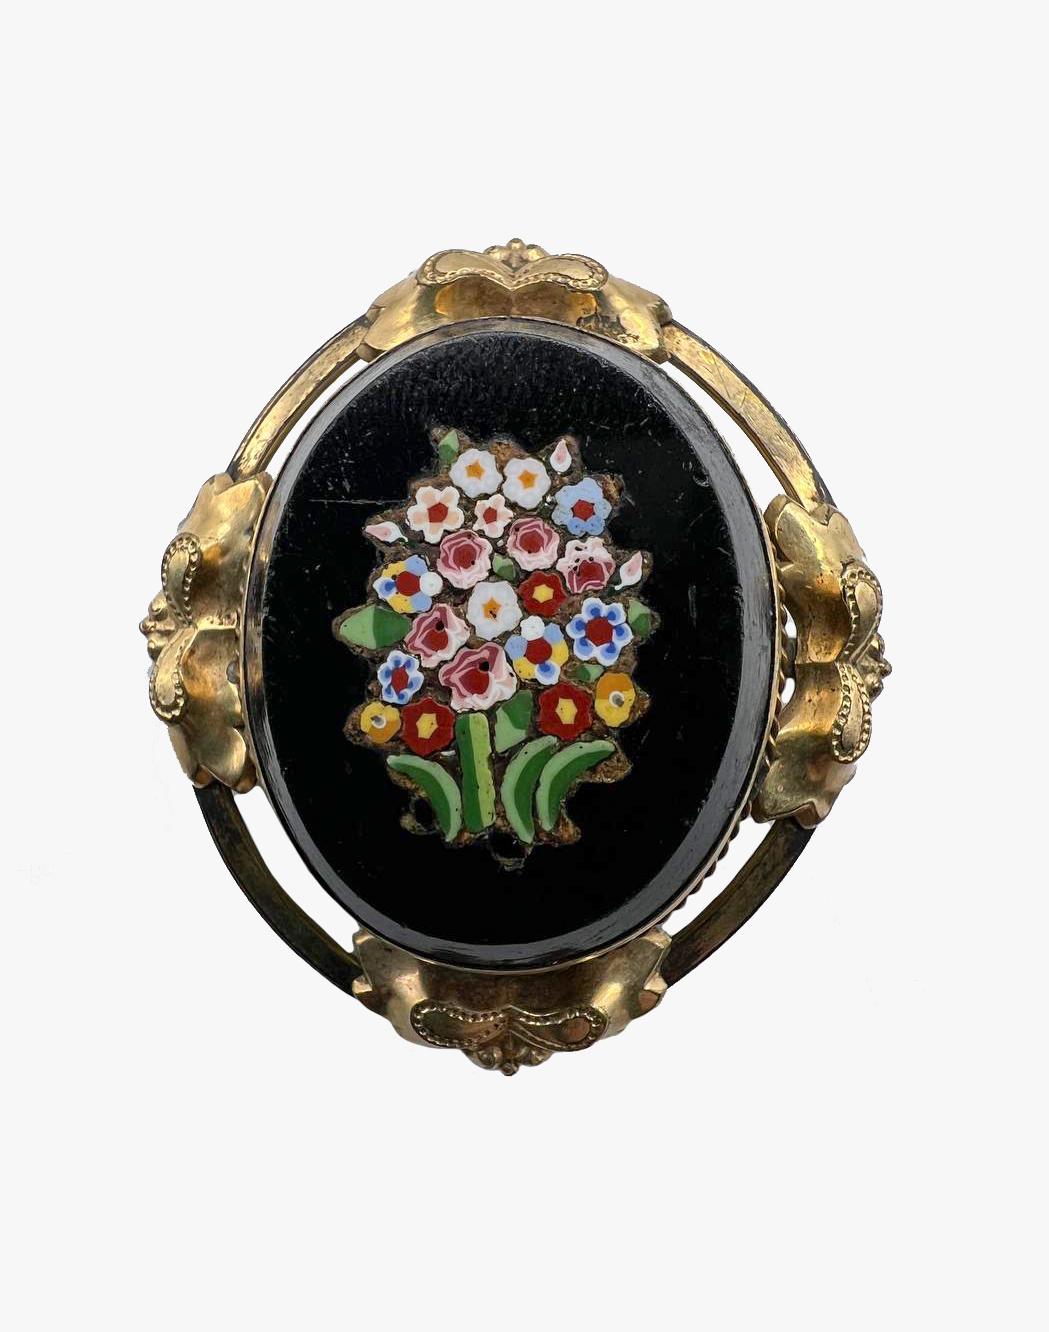 Antique black onyx brooch with micromosaic flower

Made in Pietra Dura technique 

Counrty –  Italy

Period – 1900s

Dimensions – 3 x 2 cm

Condition – good, traces of time on metal

........Additional information ........

- Photo might be slightly